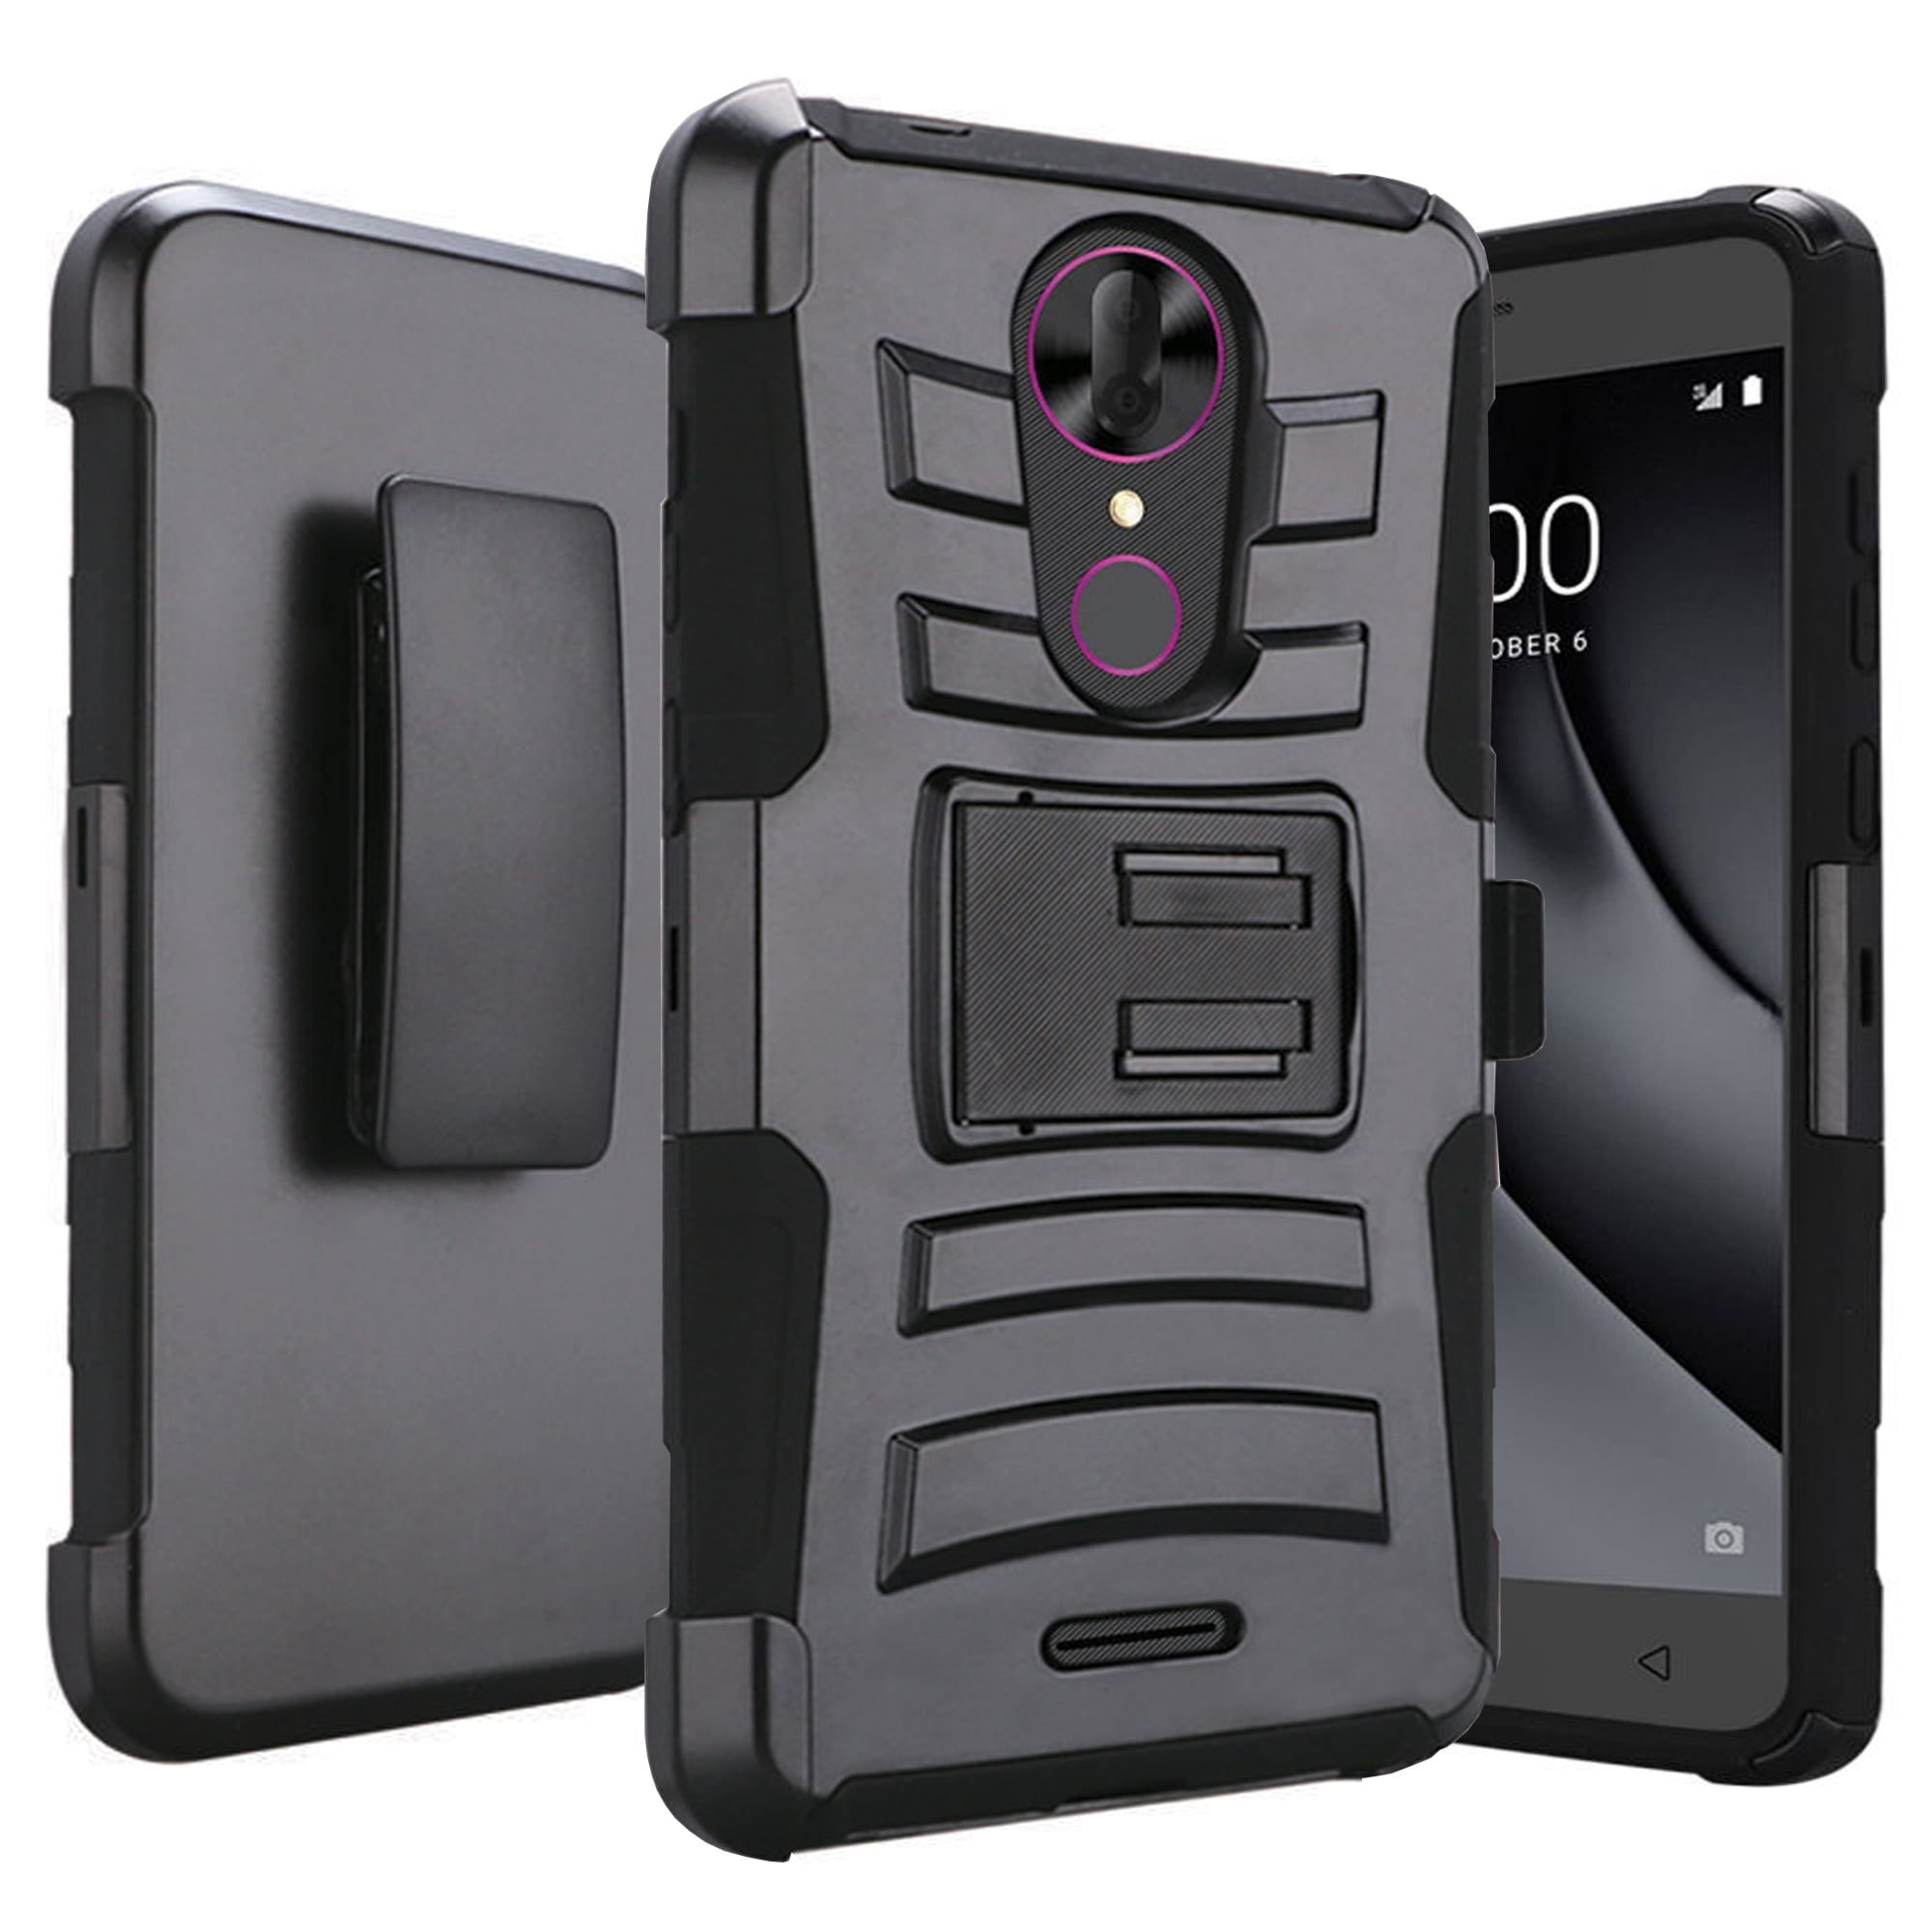 DALUX Hybrid Kickstand Holster Phone Case Compatible with Alcatel Onyx / TCL A1X A503DL - Black